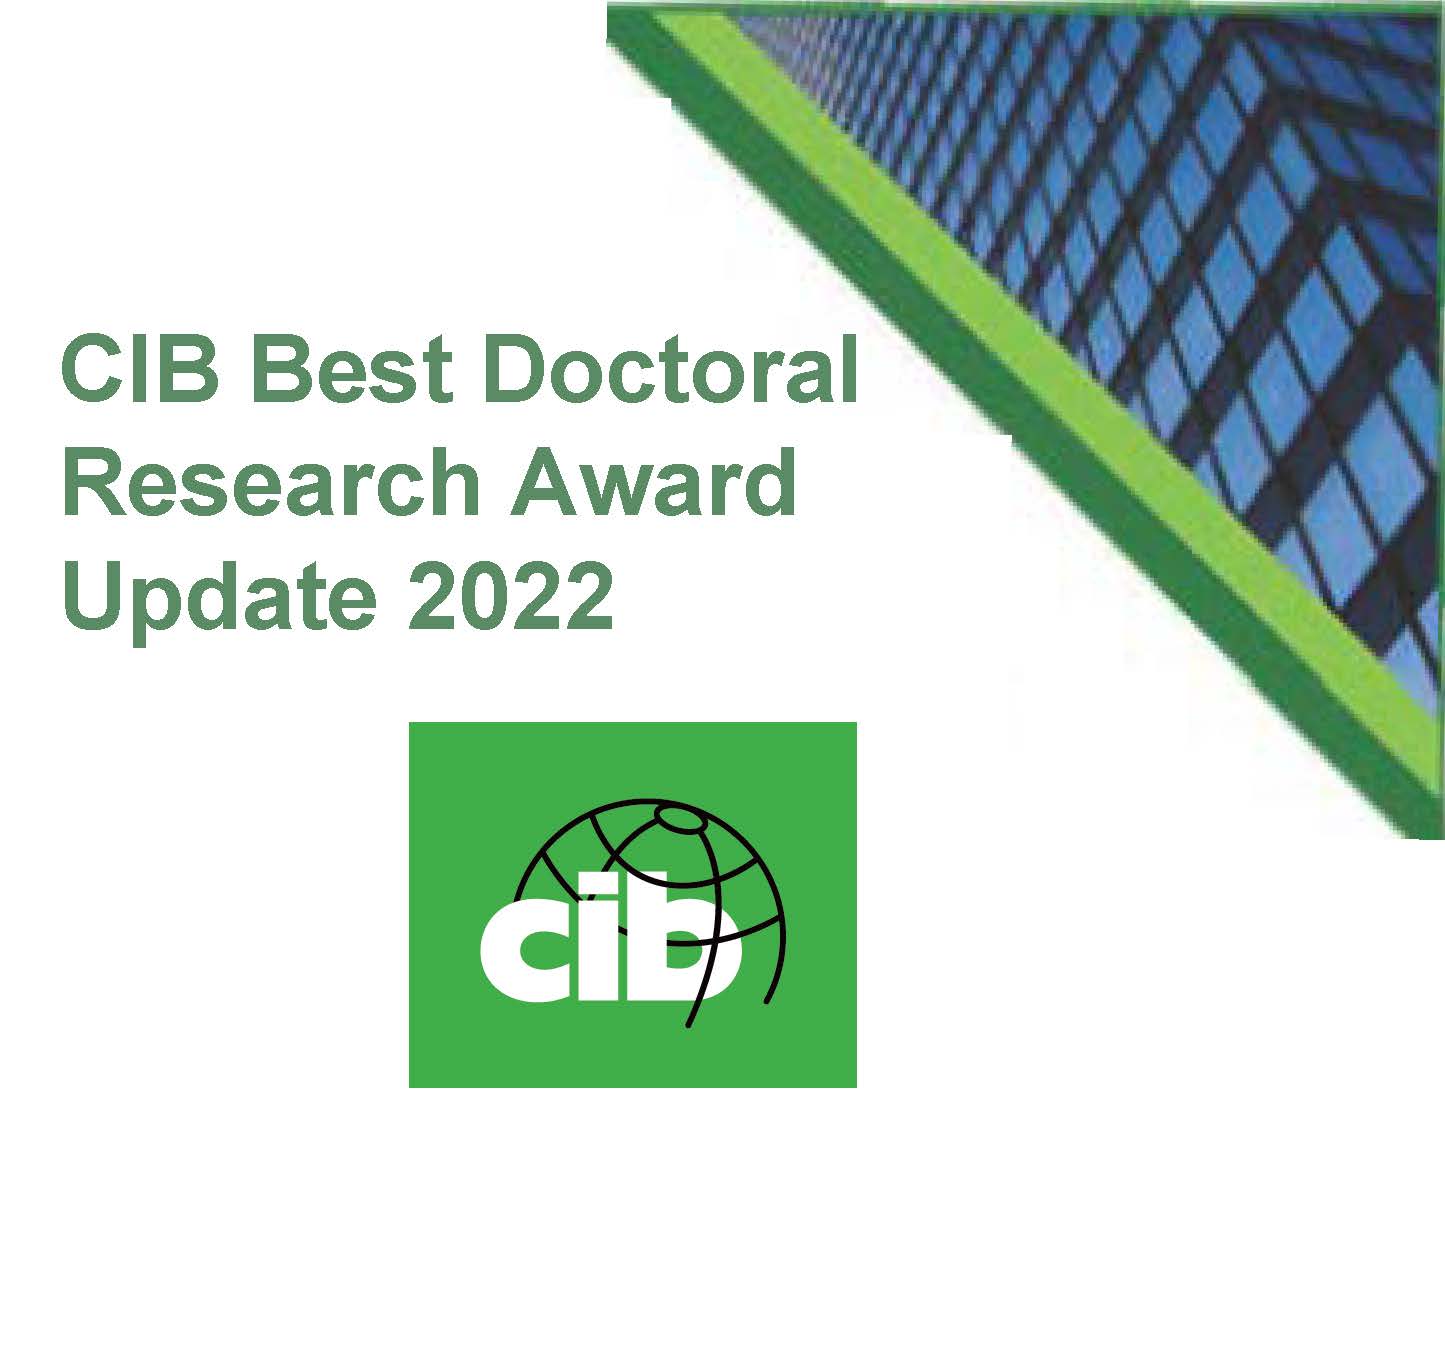 CIB Best Doctoral Research Award 2022 – Now Closed